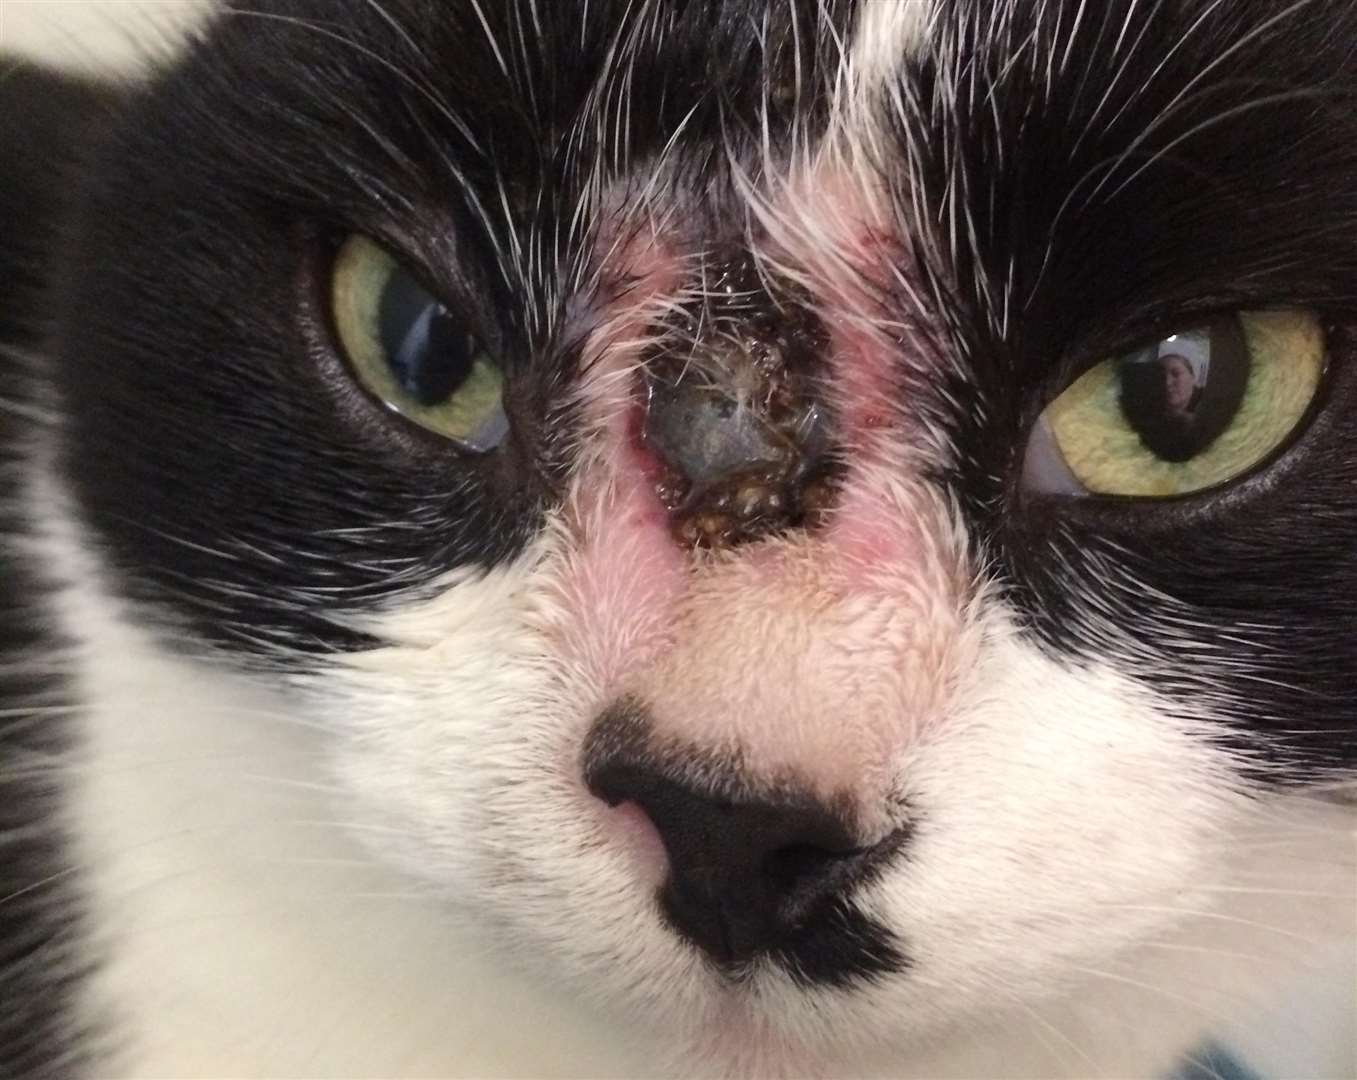 The cat was shot in the face with a ball bearing. Picture: RSPCA (7463951)